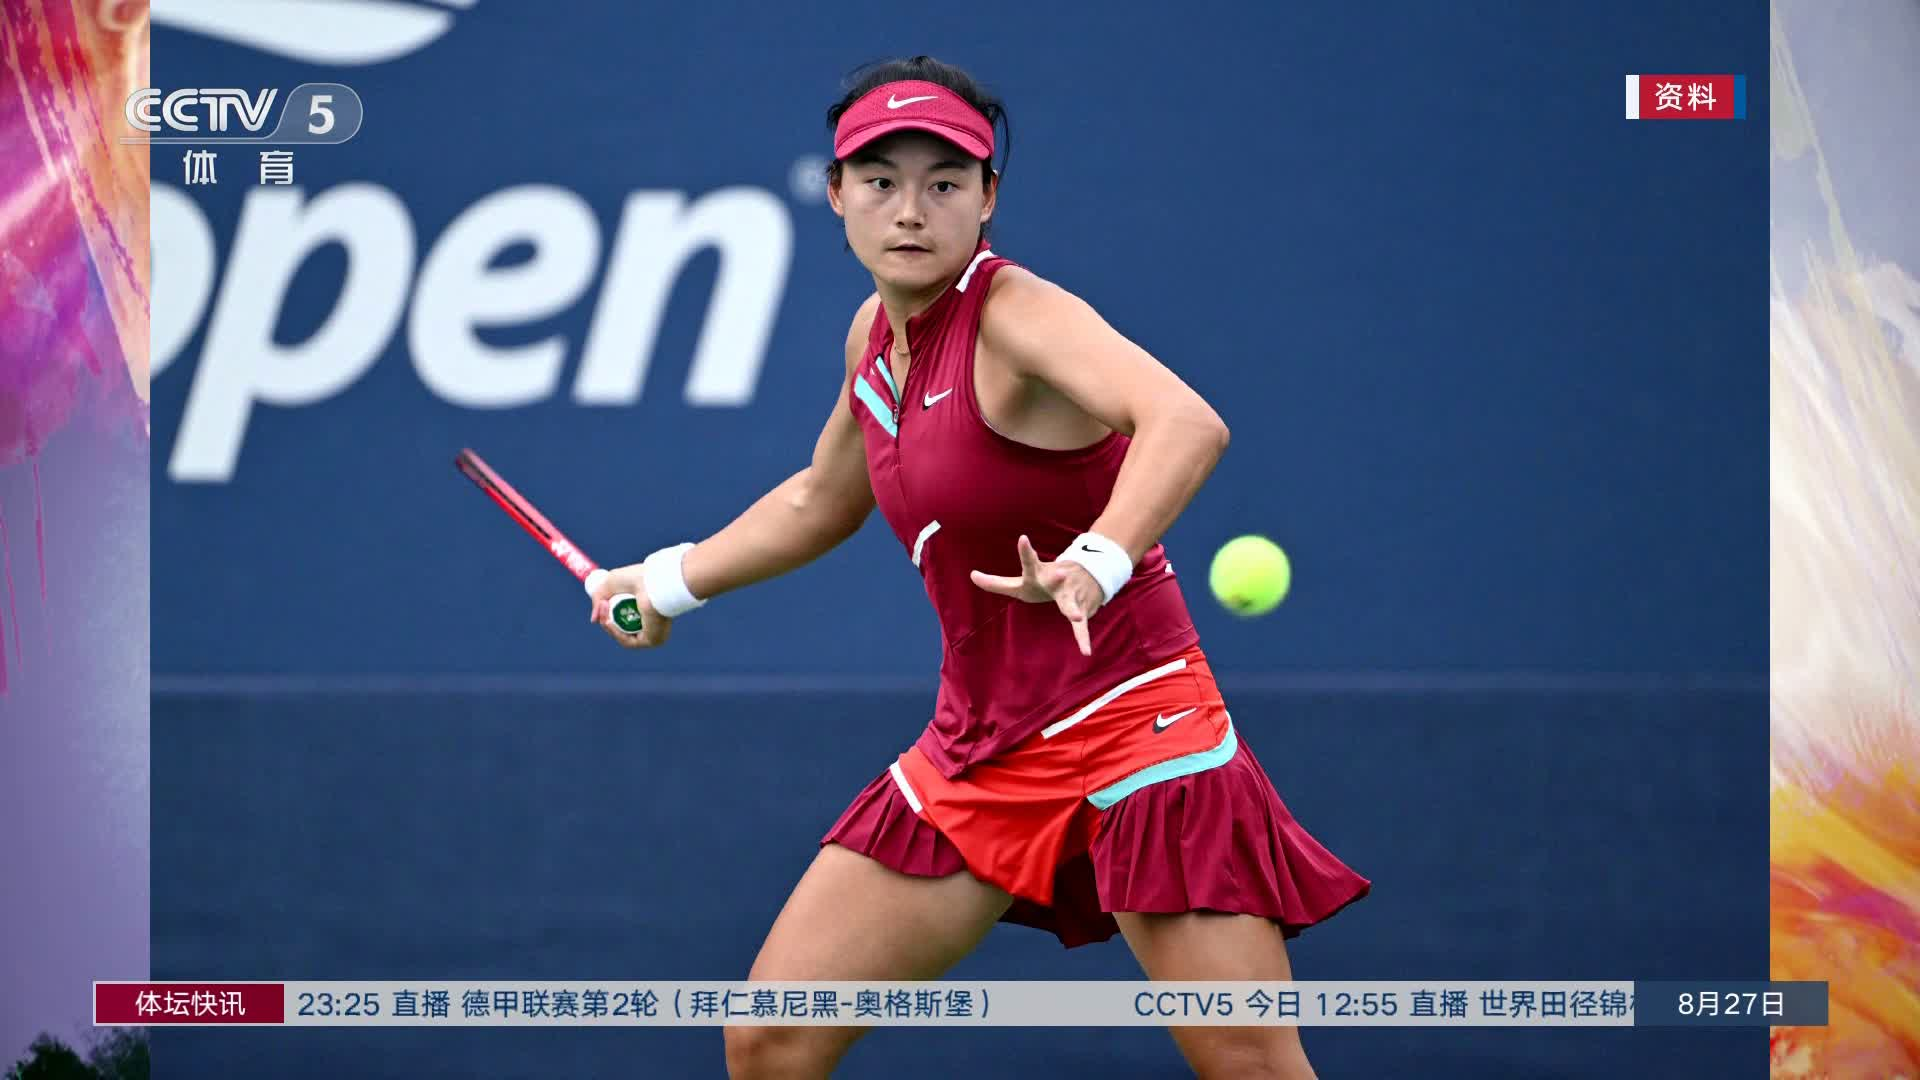 Wang Yafan of China competes in the U.S. Open women's singles qualifying match against Marina Bassols Ribera of Spain in New York, August 25, 2023. /China Media Group